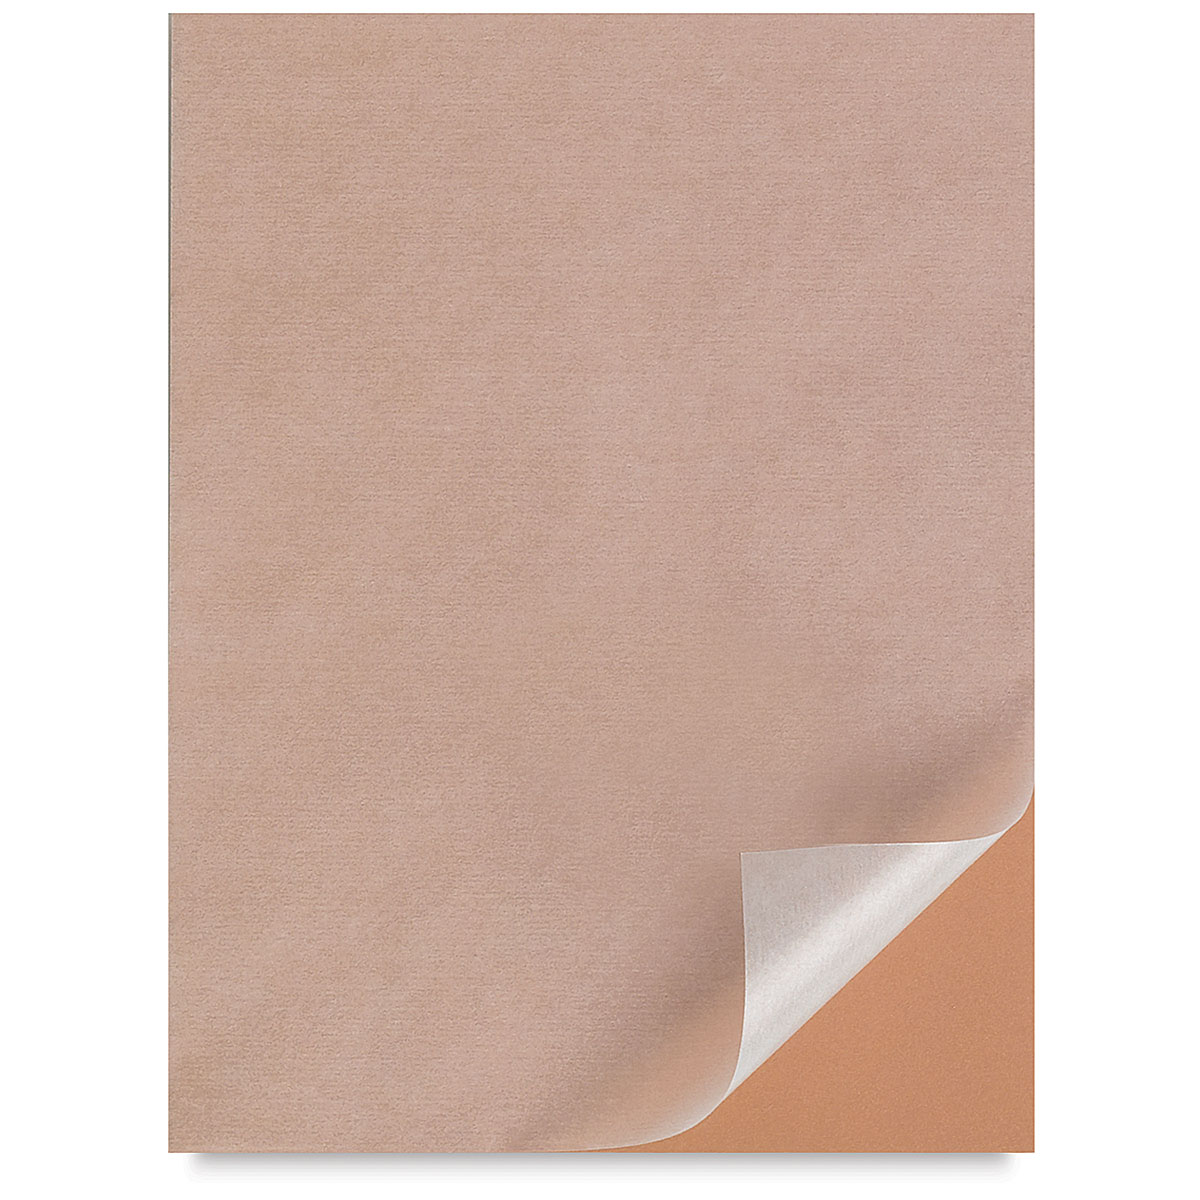 Clairefontaine Pastelmat Pad - 7 x 9-1/2, Assorted, Palette No. 2, 12  Sheets